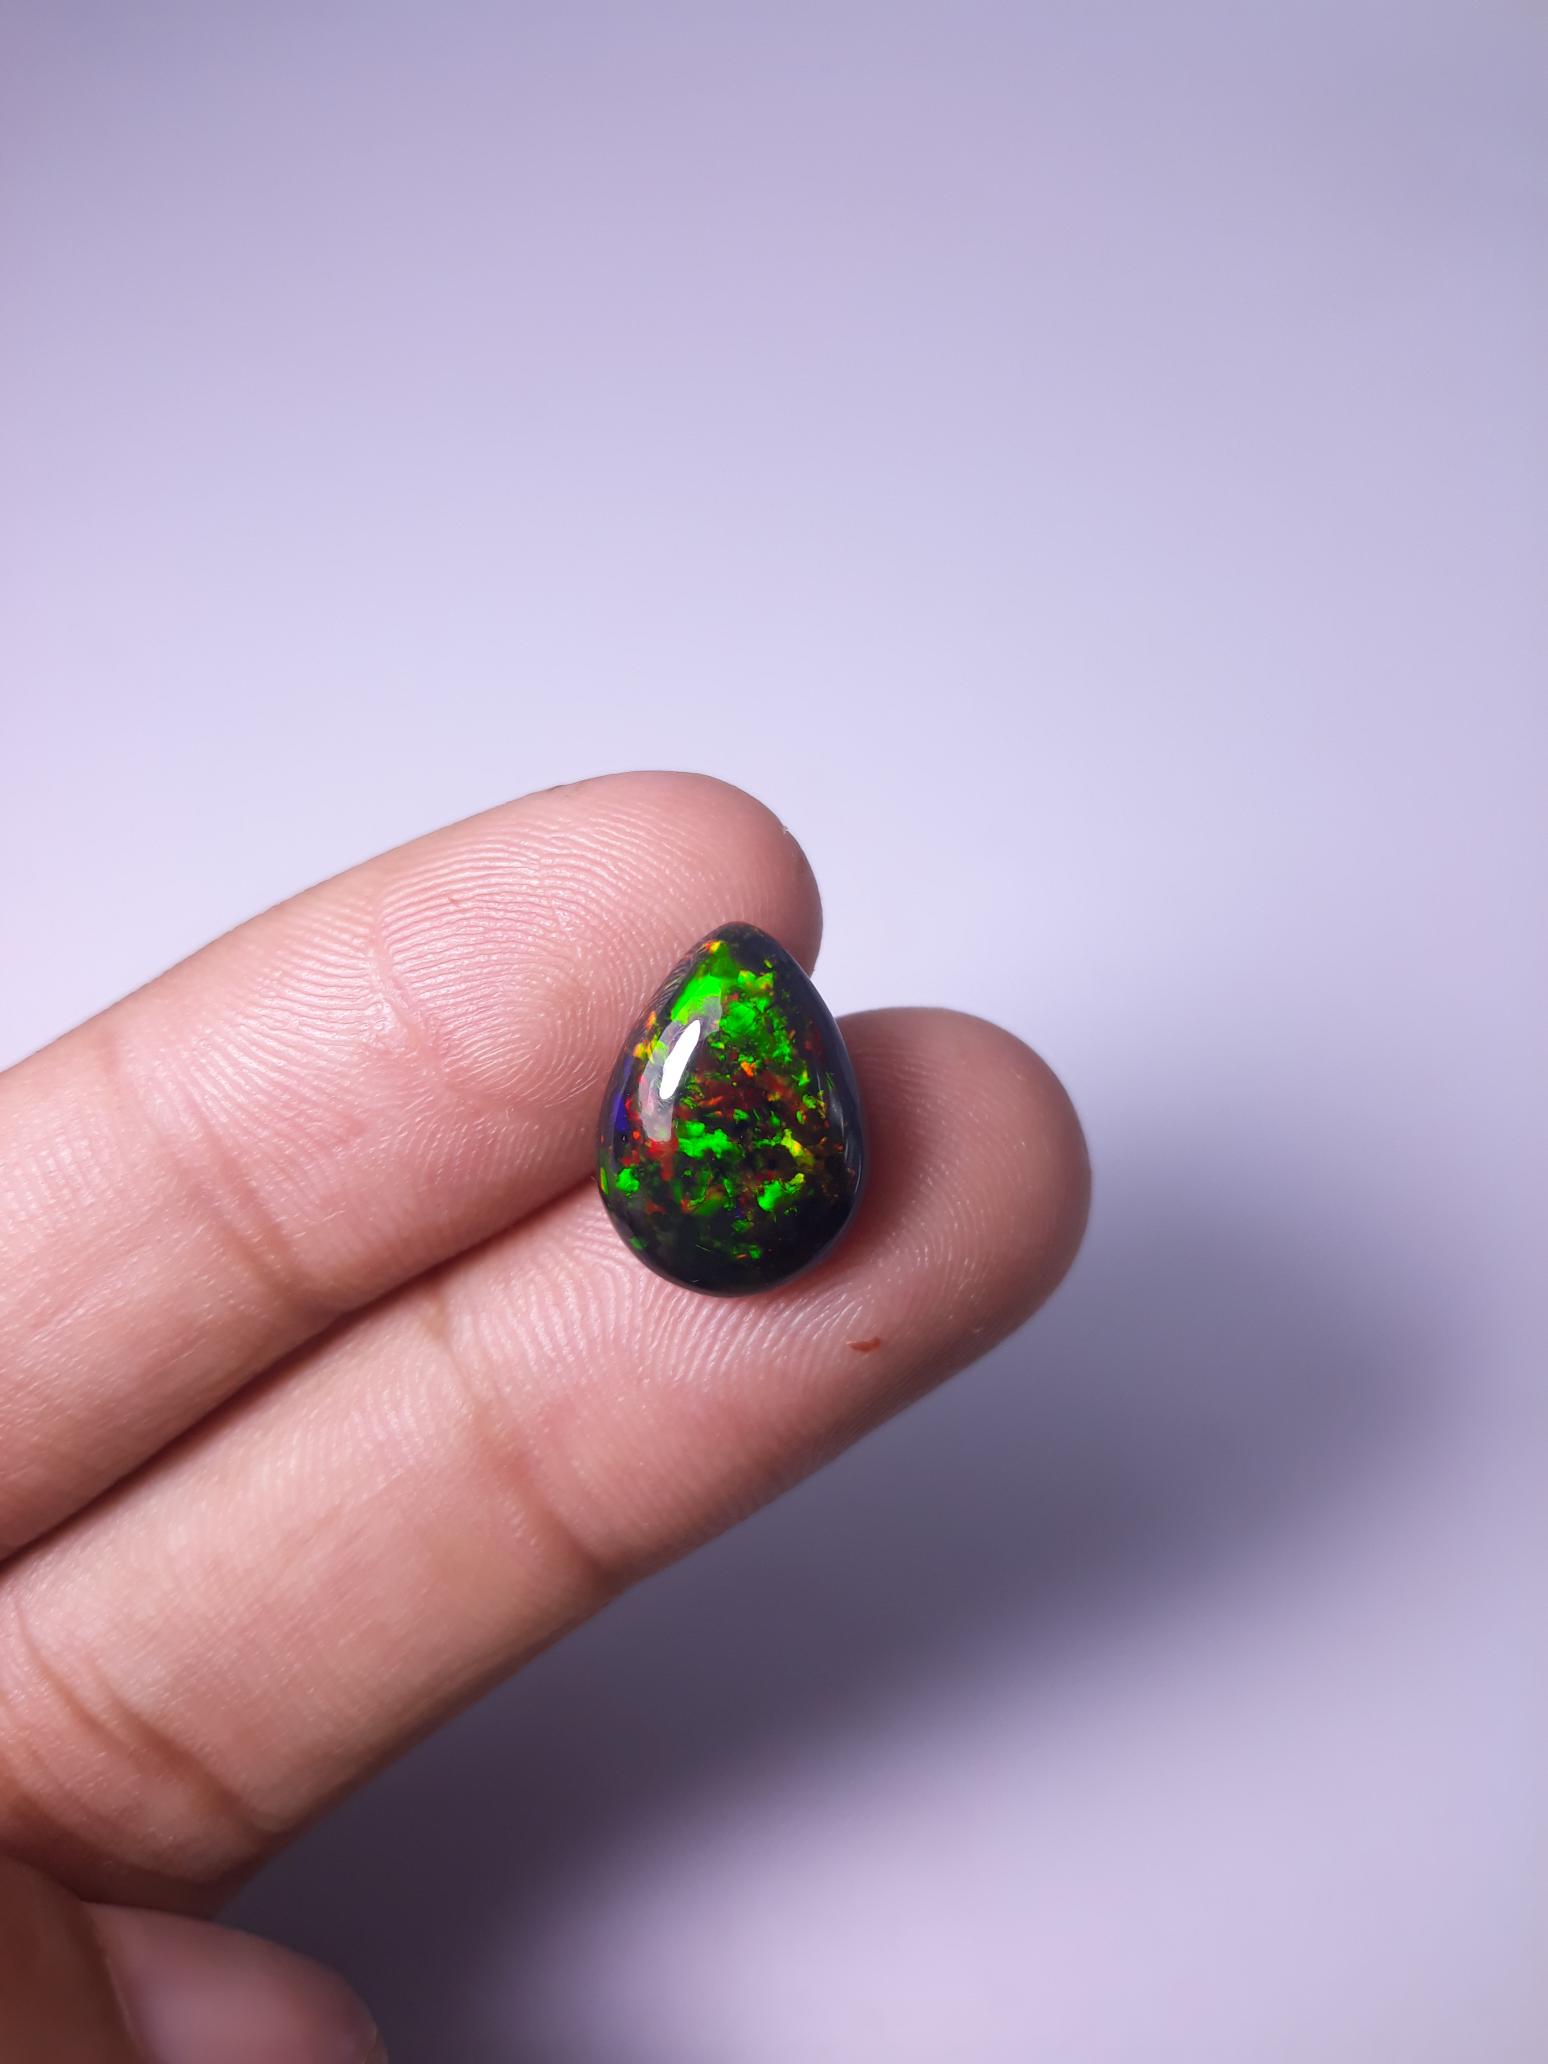 3.80ct Opal for Sale - Black Fire Opal - October Birthstone - 15.4x11.4x5mm